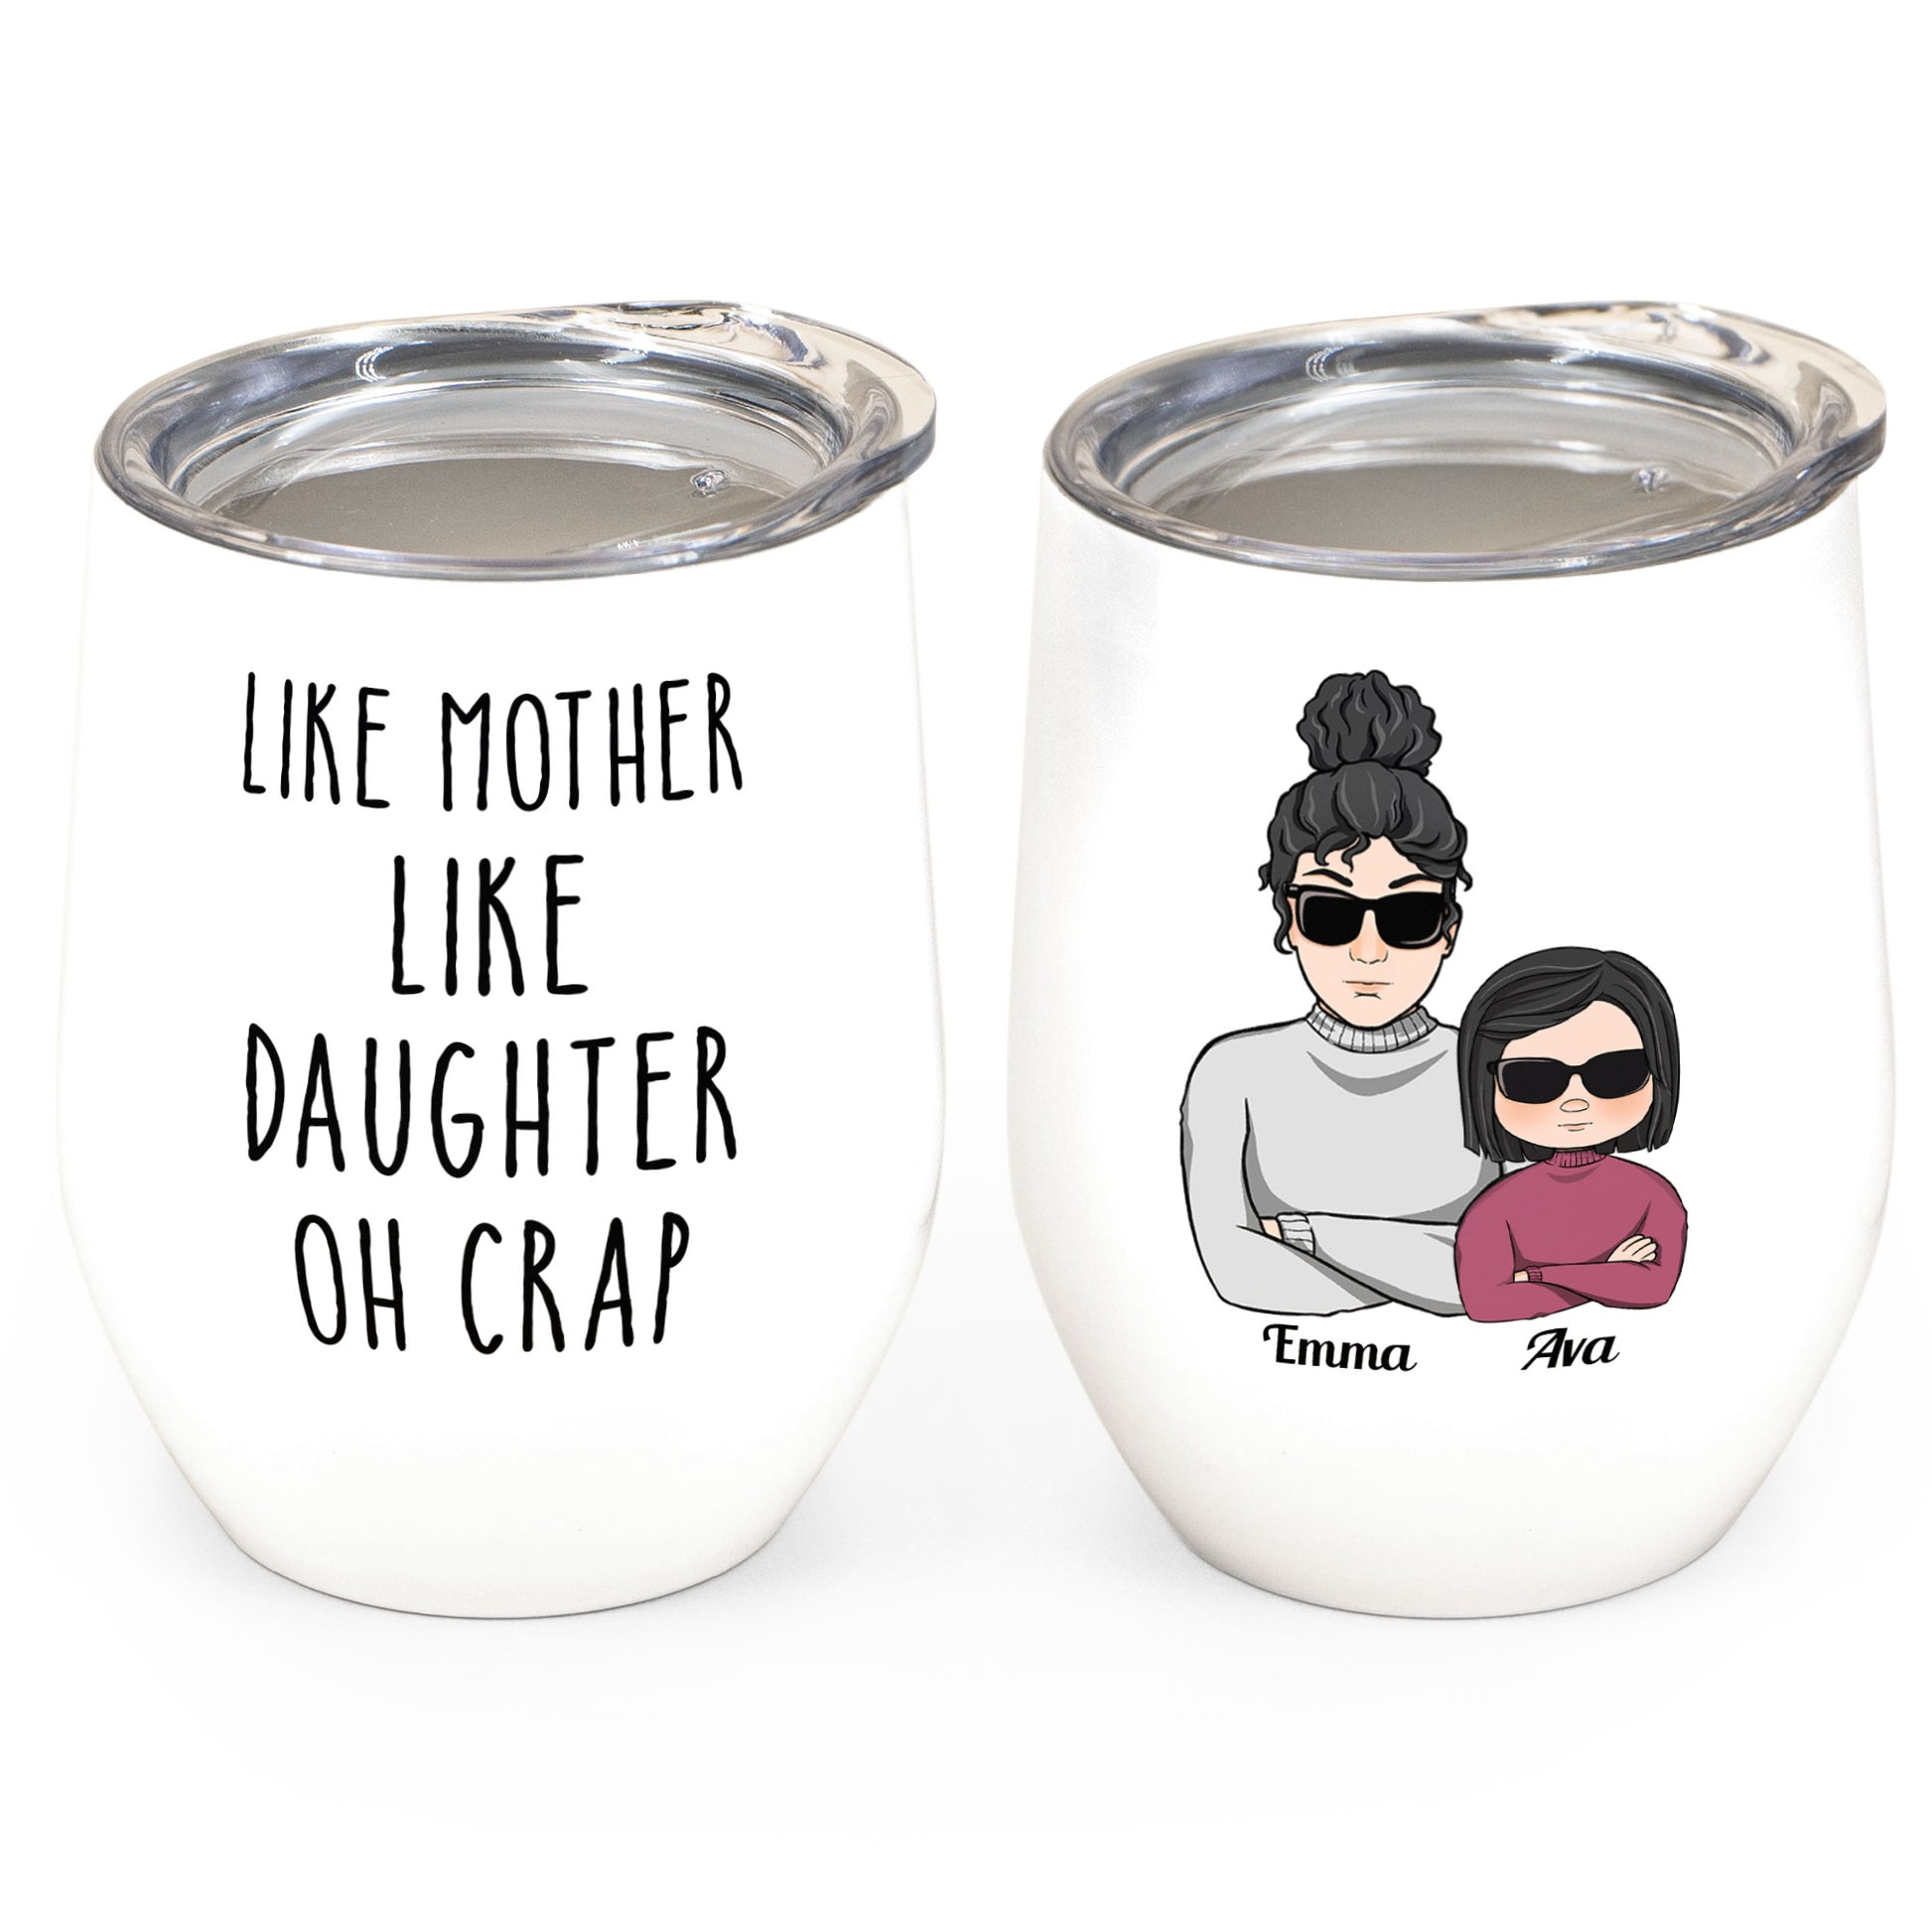 Oh Crap Like Mother Like Daughter - Gift For Mom, Grandma - Personaliz -  Pawfect House ™